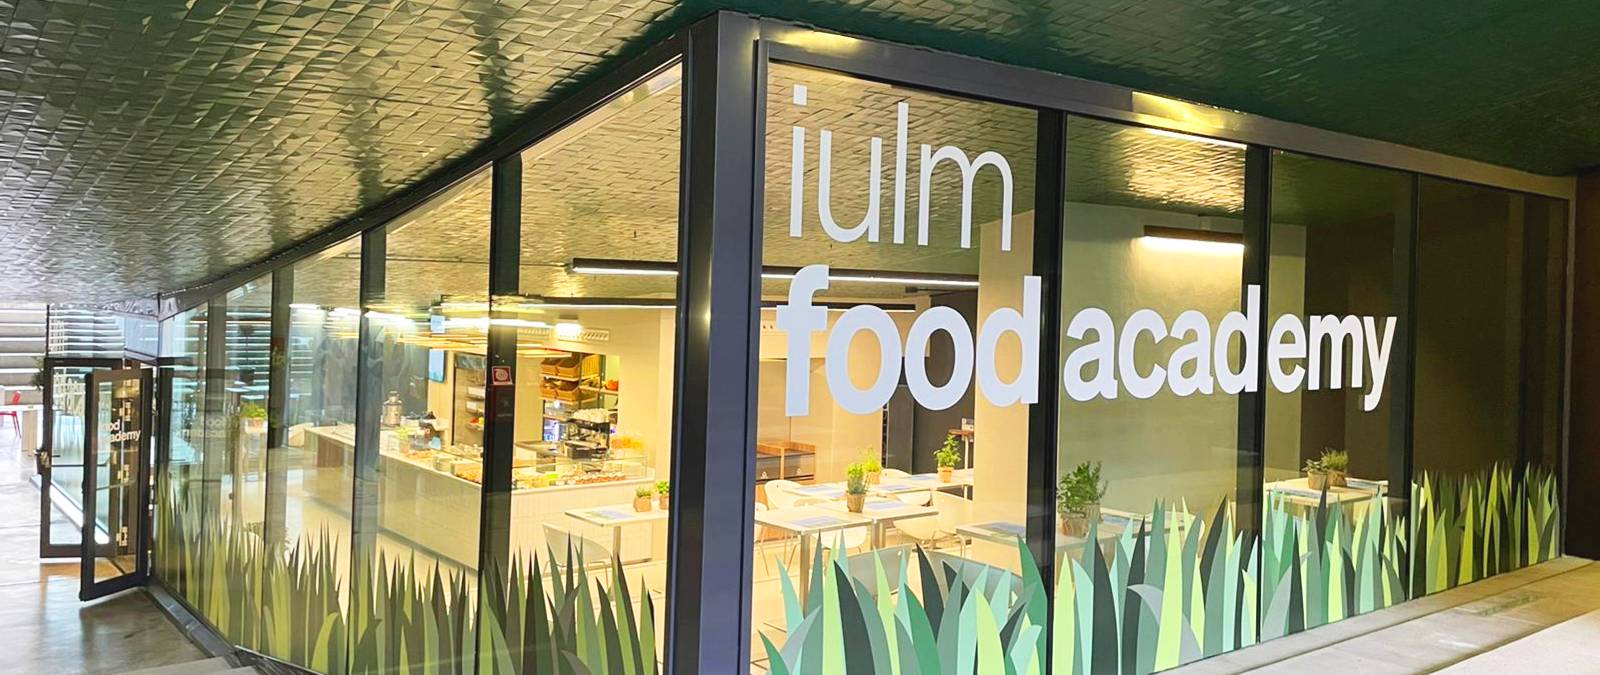 IULM Food Academy reopens with many new features